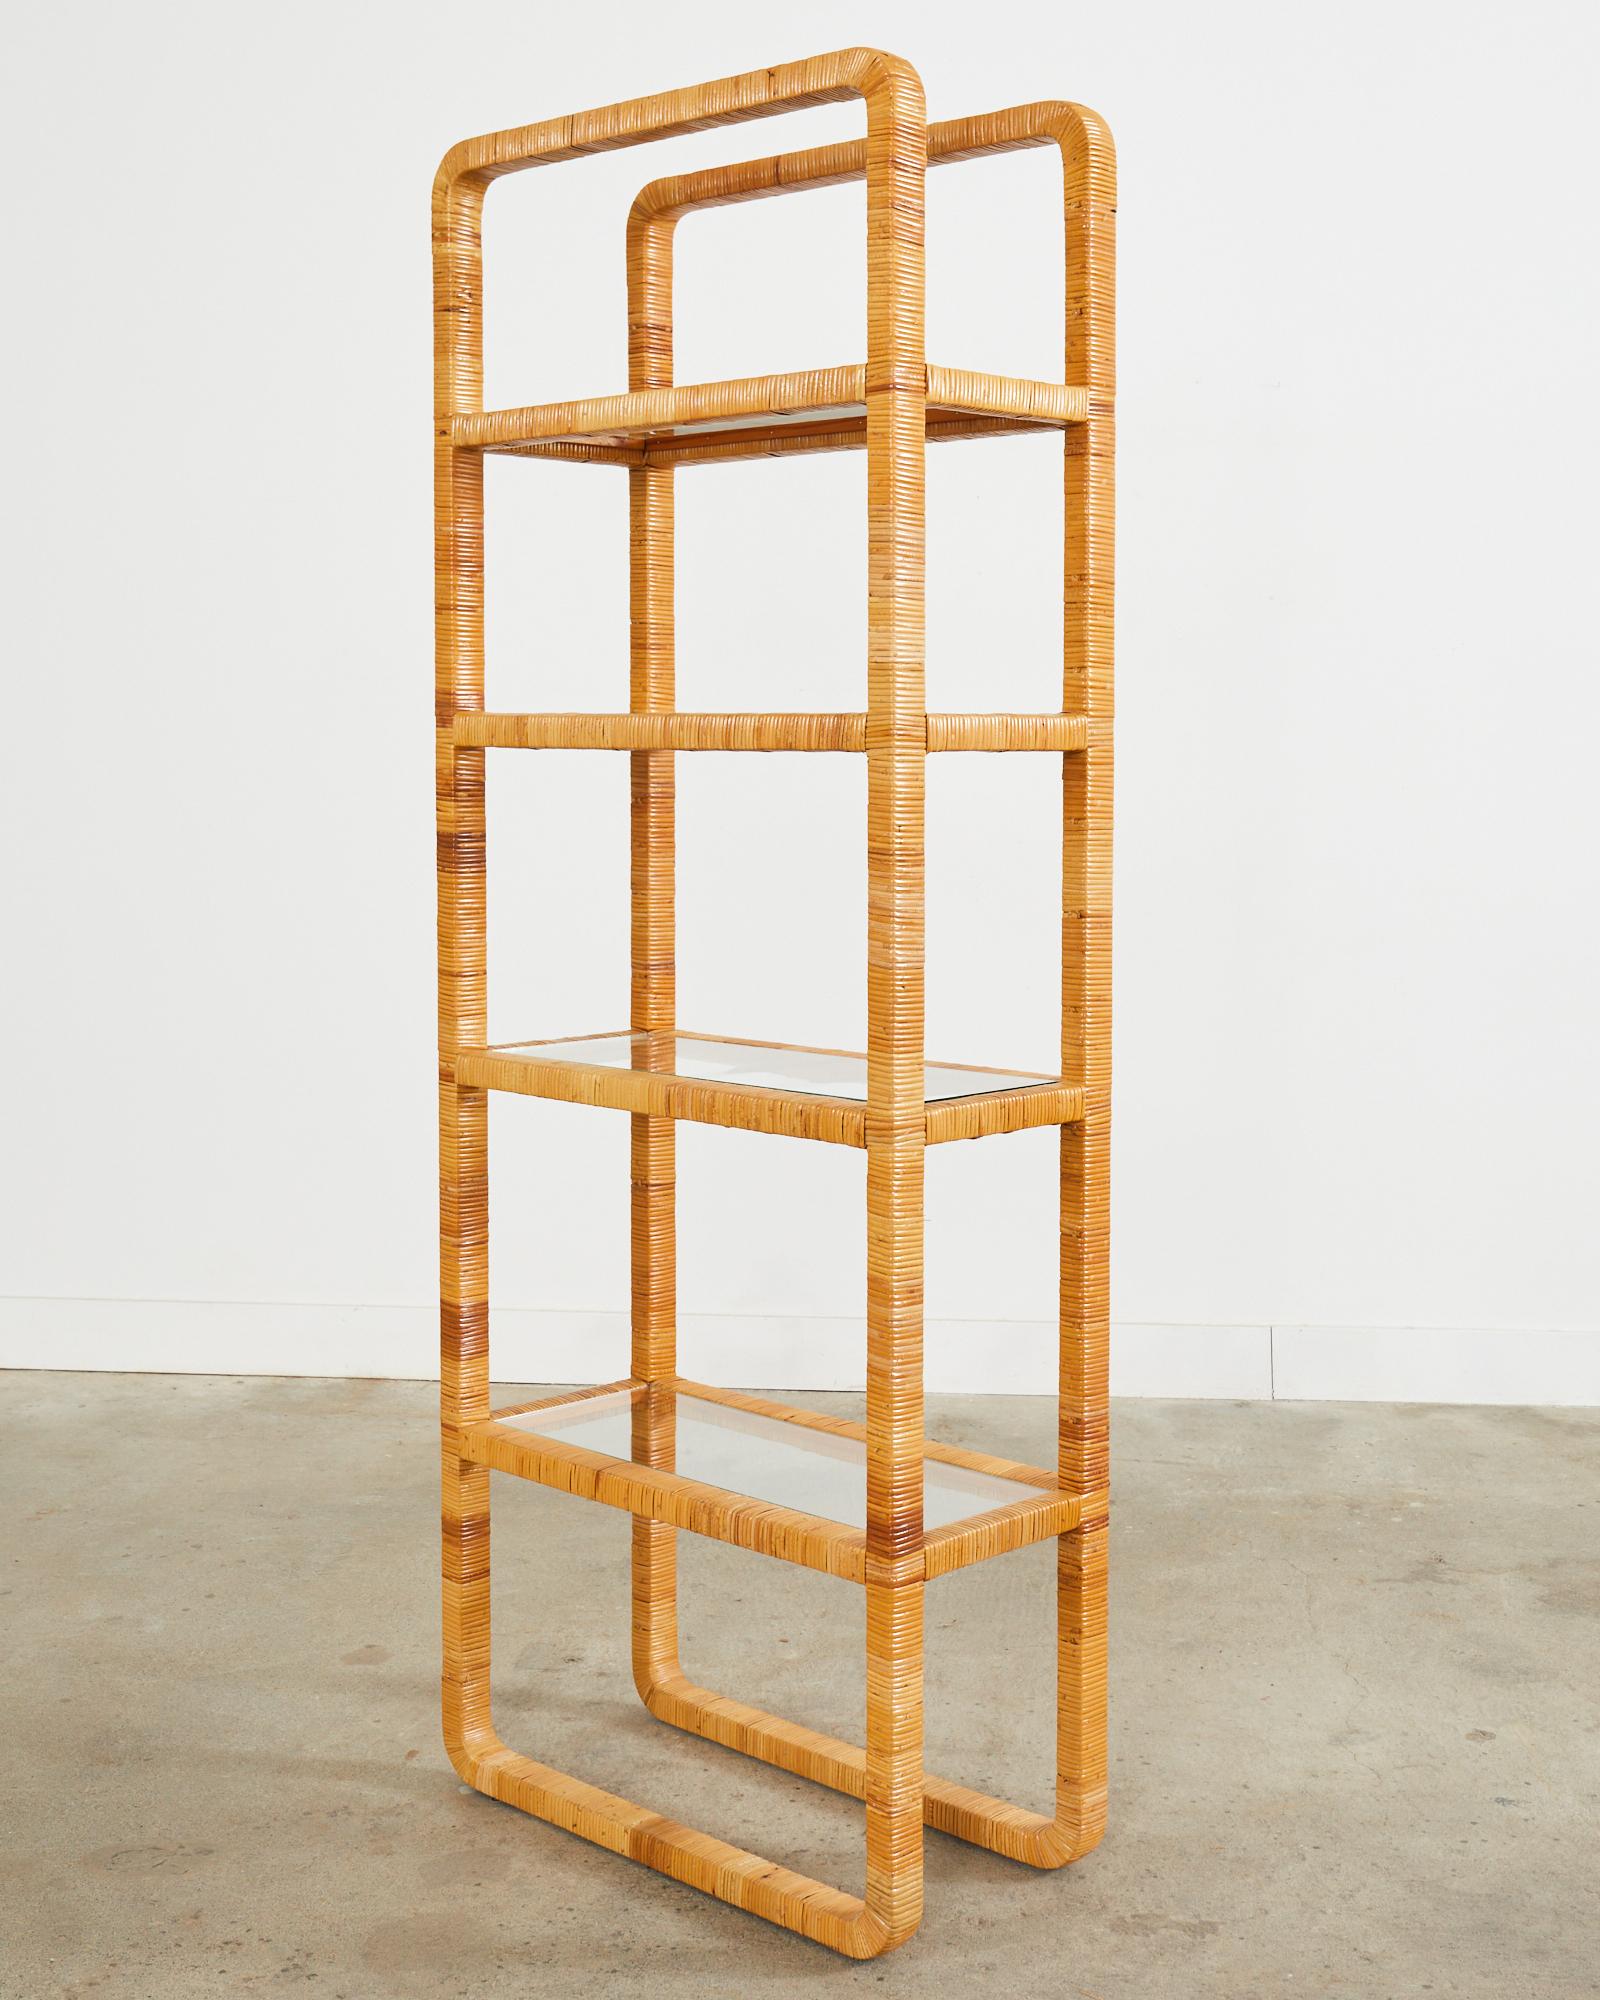 Midcentury Modern Rattan Wrapped Four Shelf Etagere Bookcase In Good Condition For Sale In Rio Vista, CA